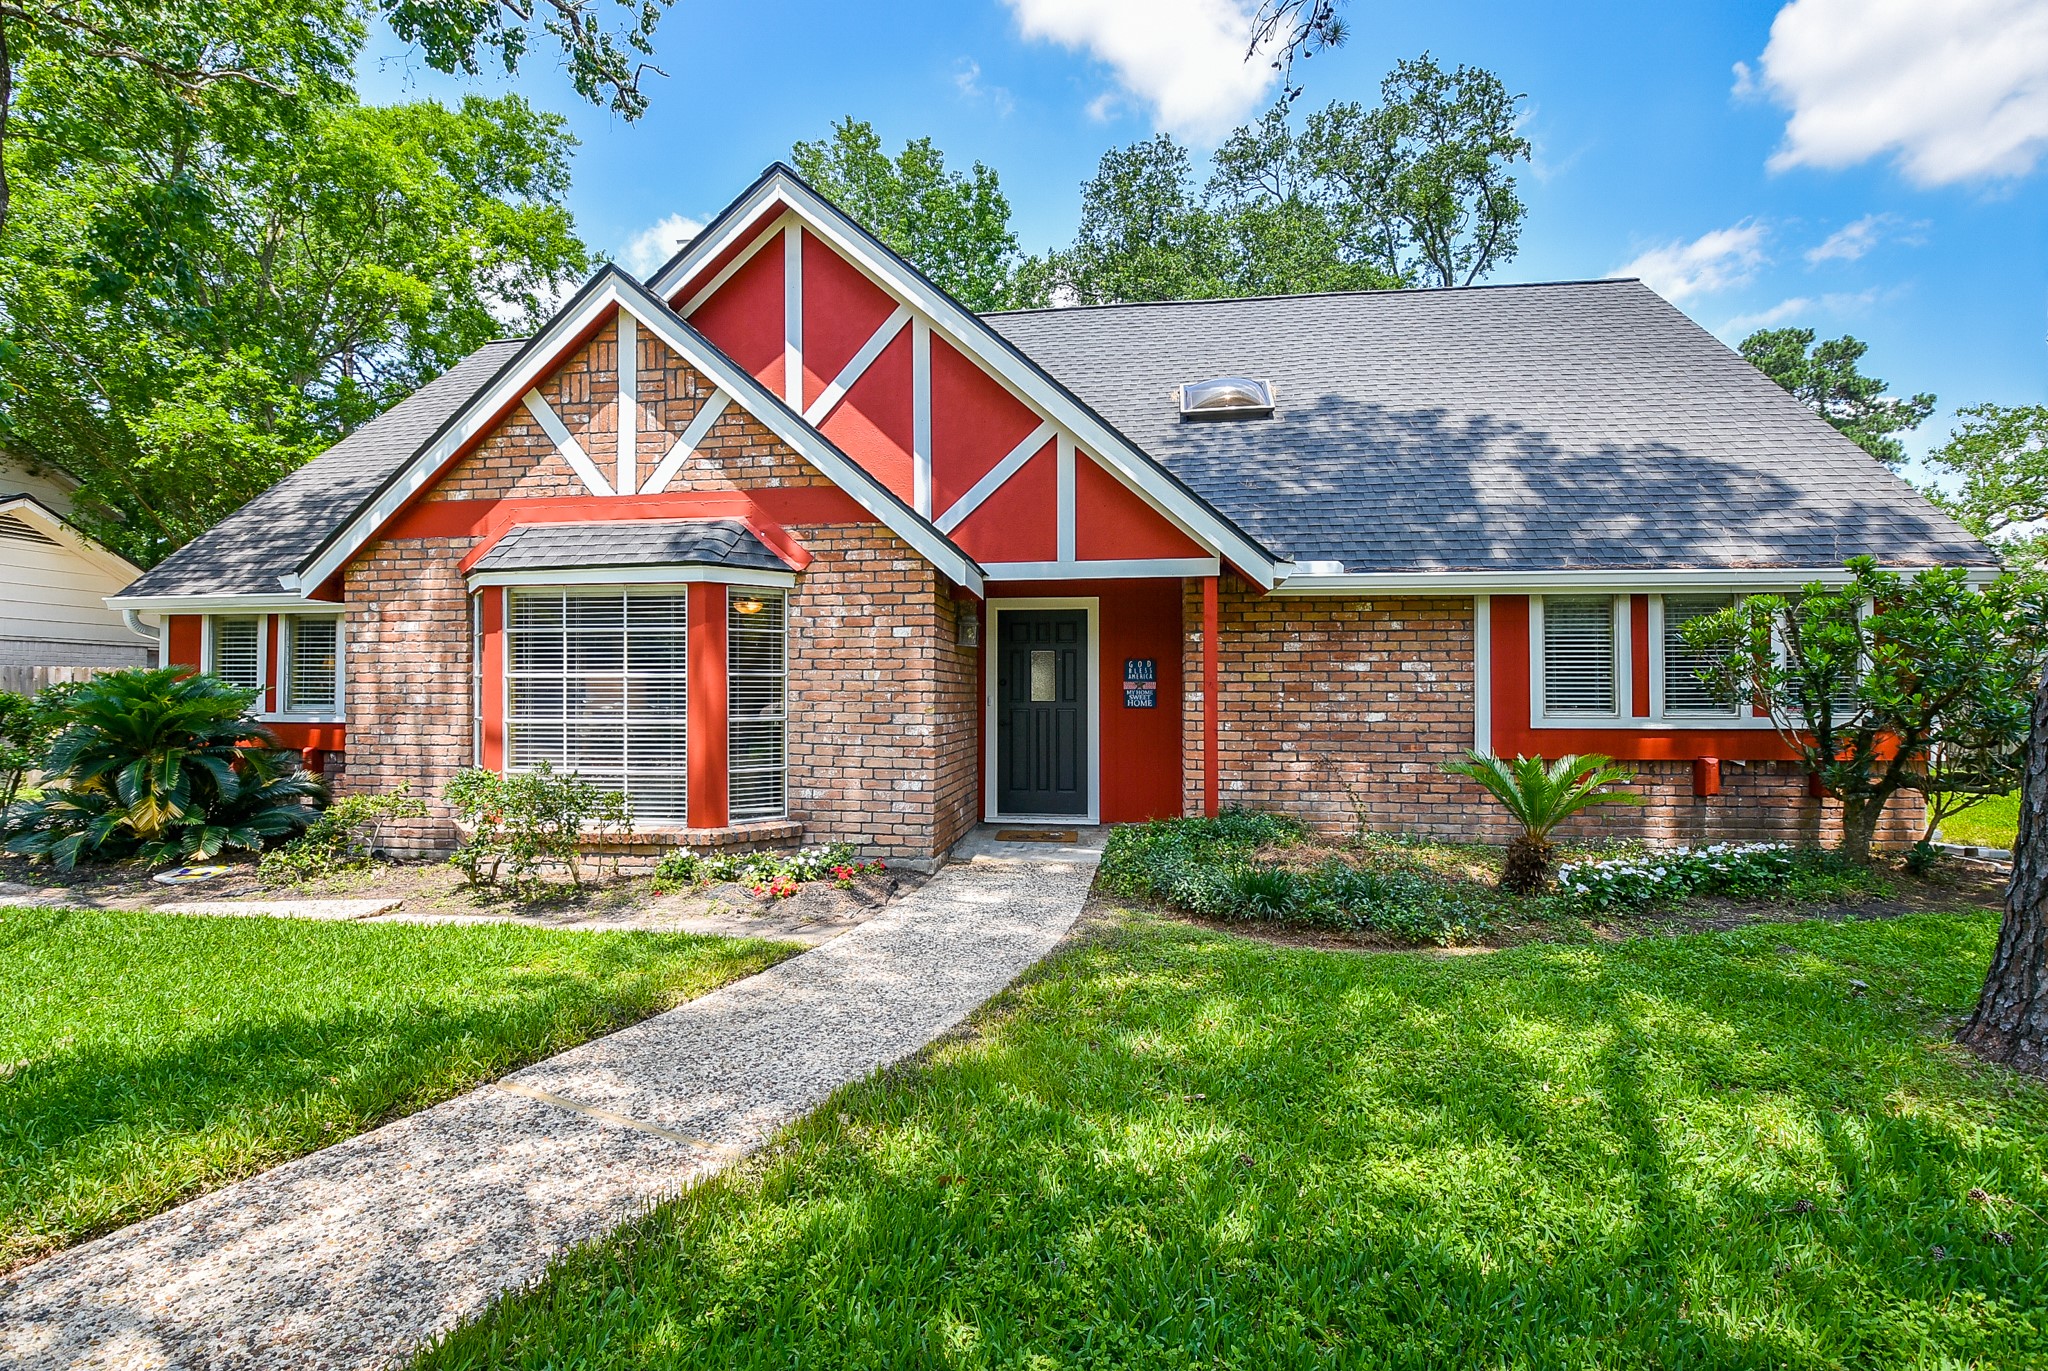 4014 Cypresswood Drive has great curb appeal!